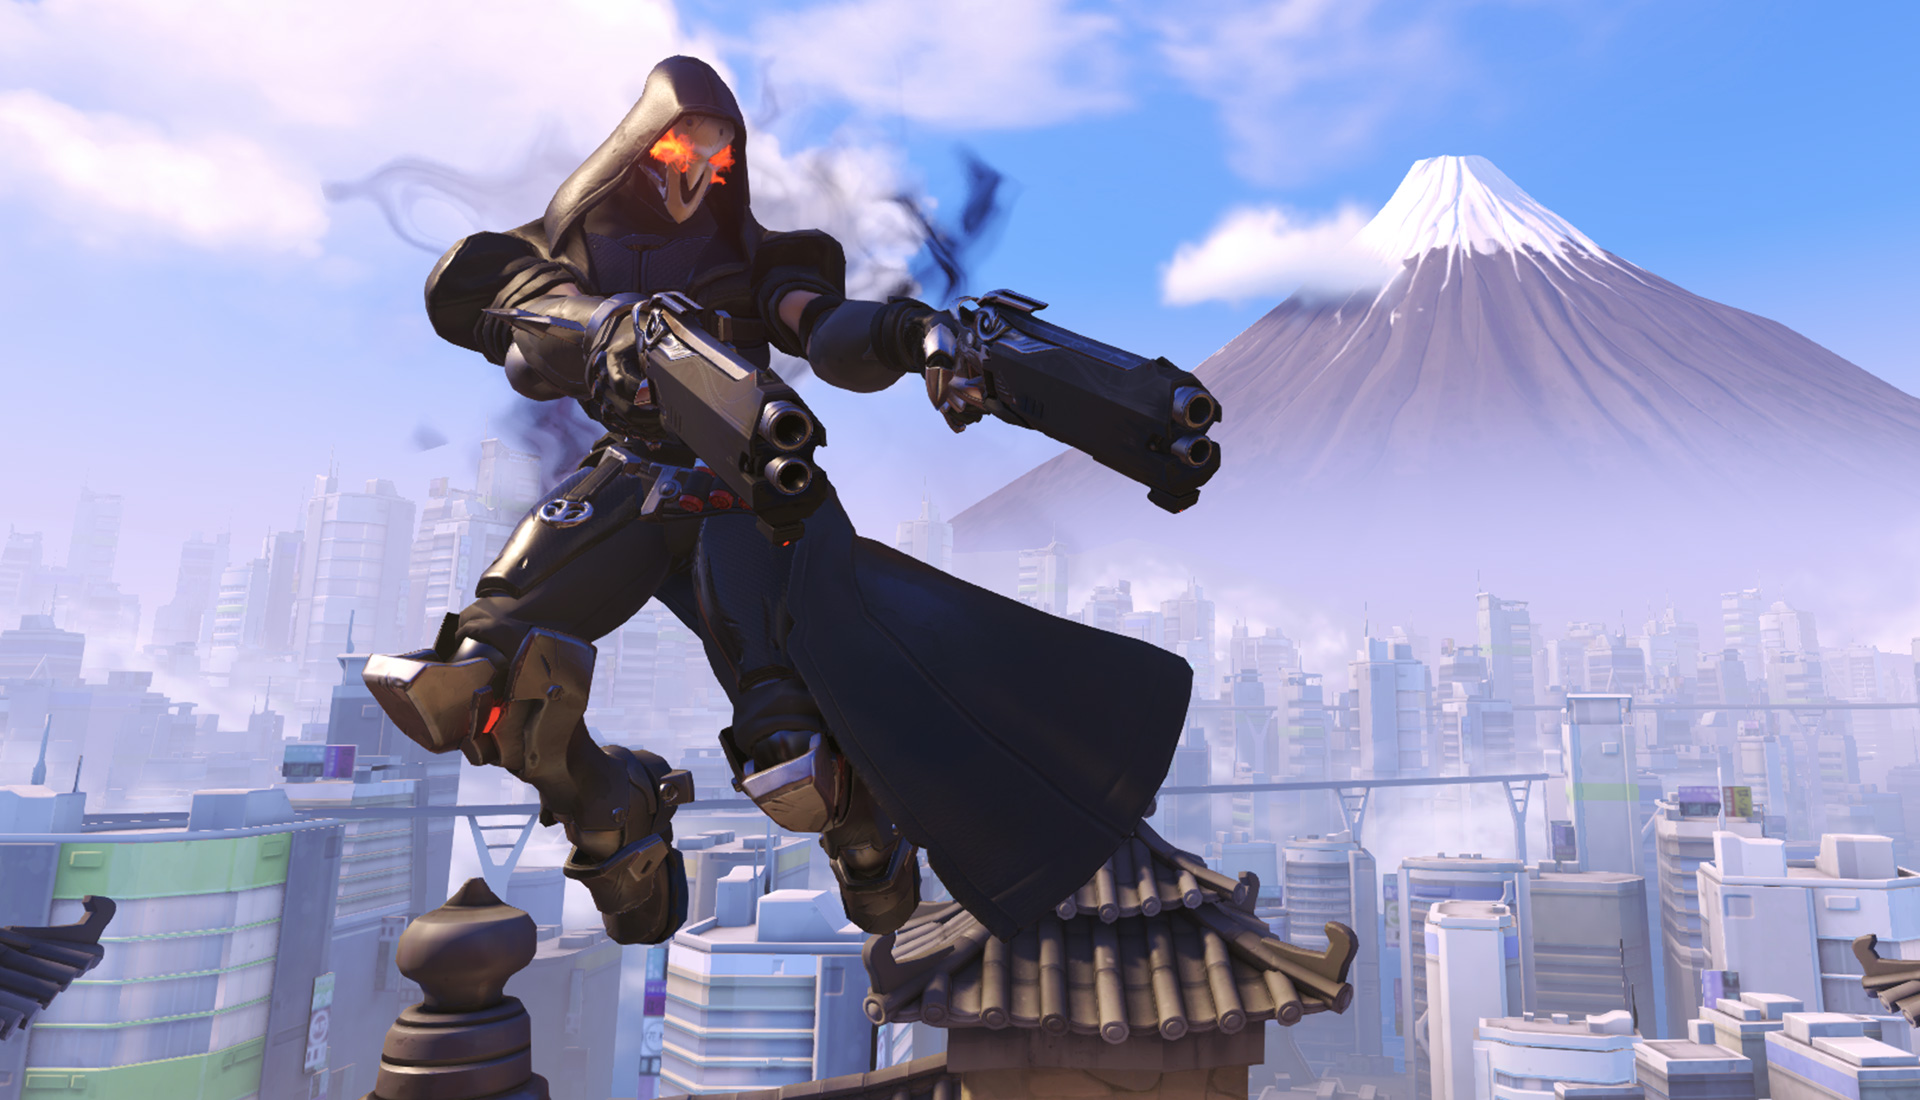 Get ready for your day of reckoning–Reaper's Code of Violence